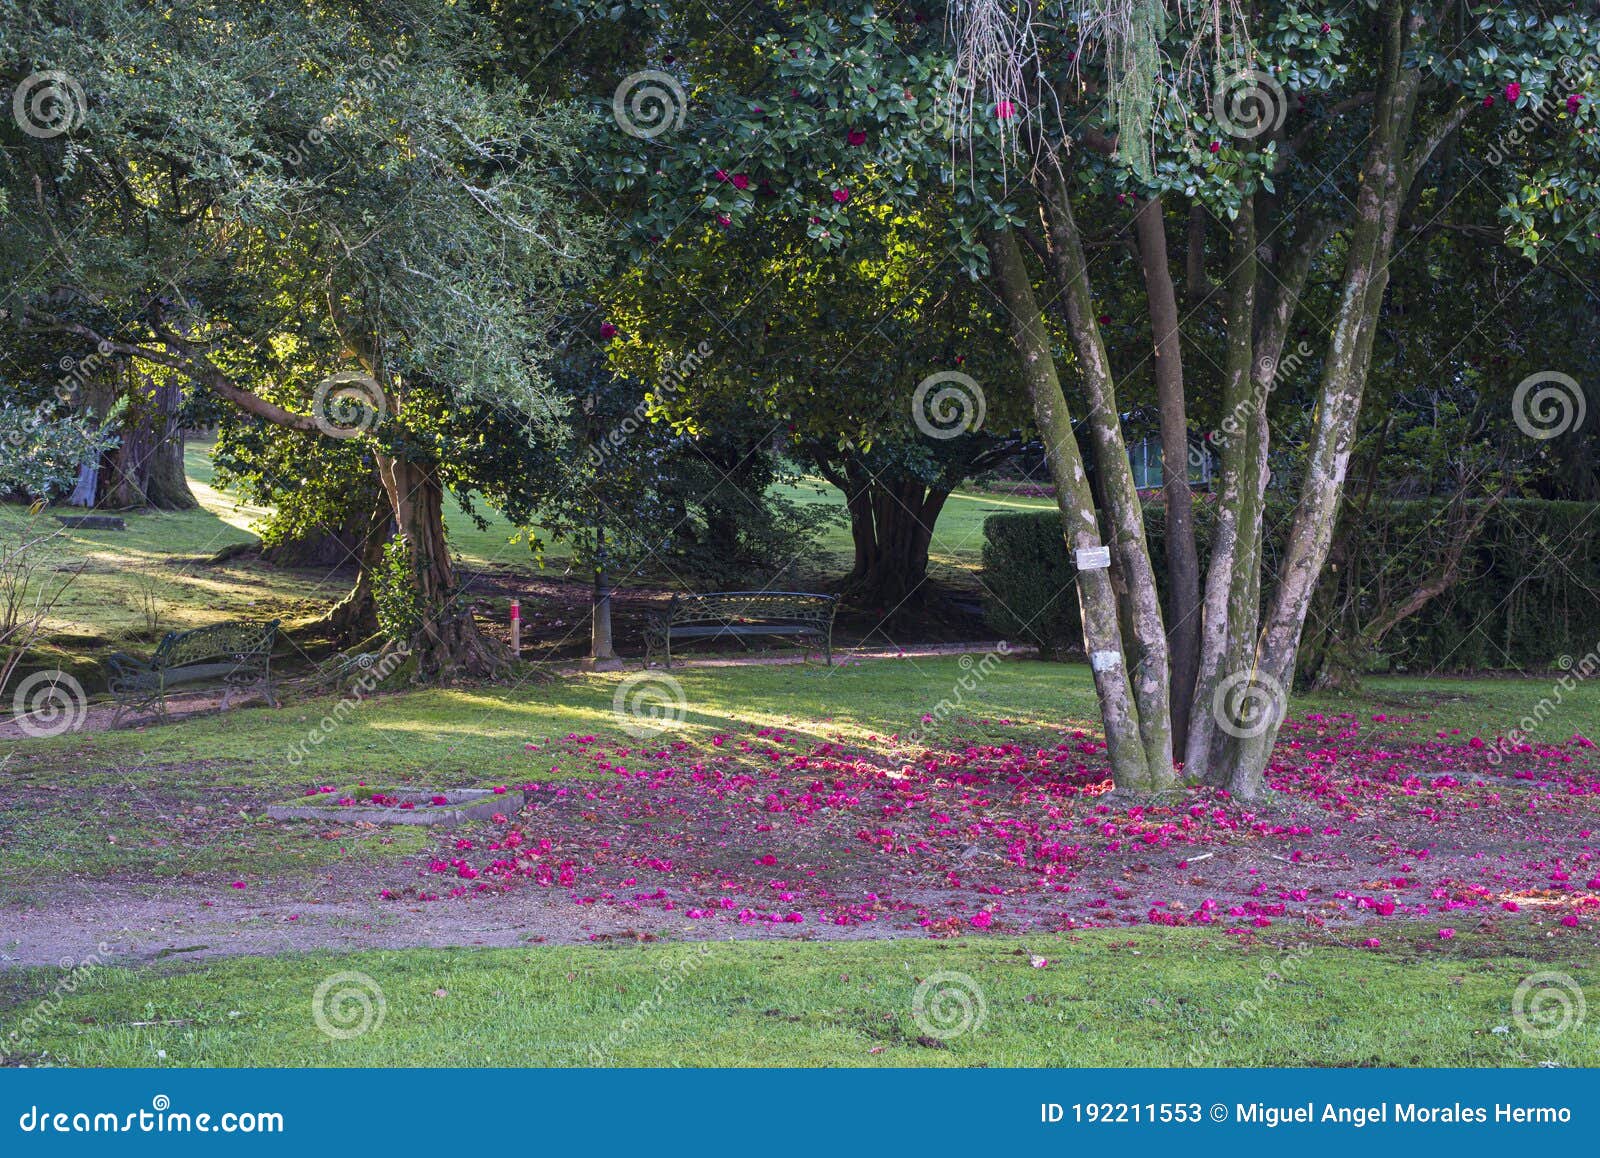 trees of great variety of camellias in galicia spain